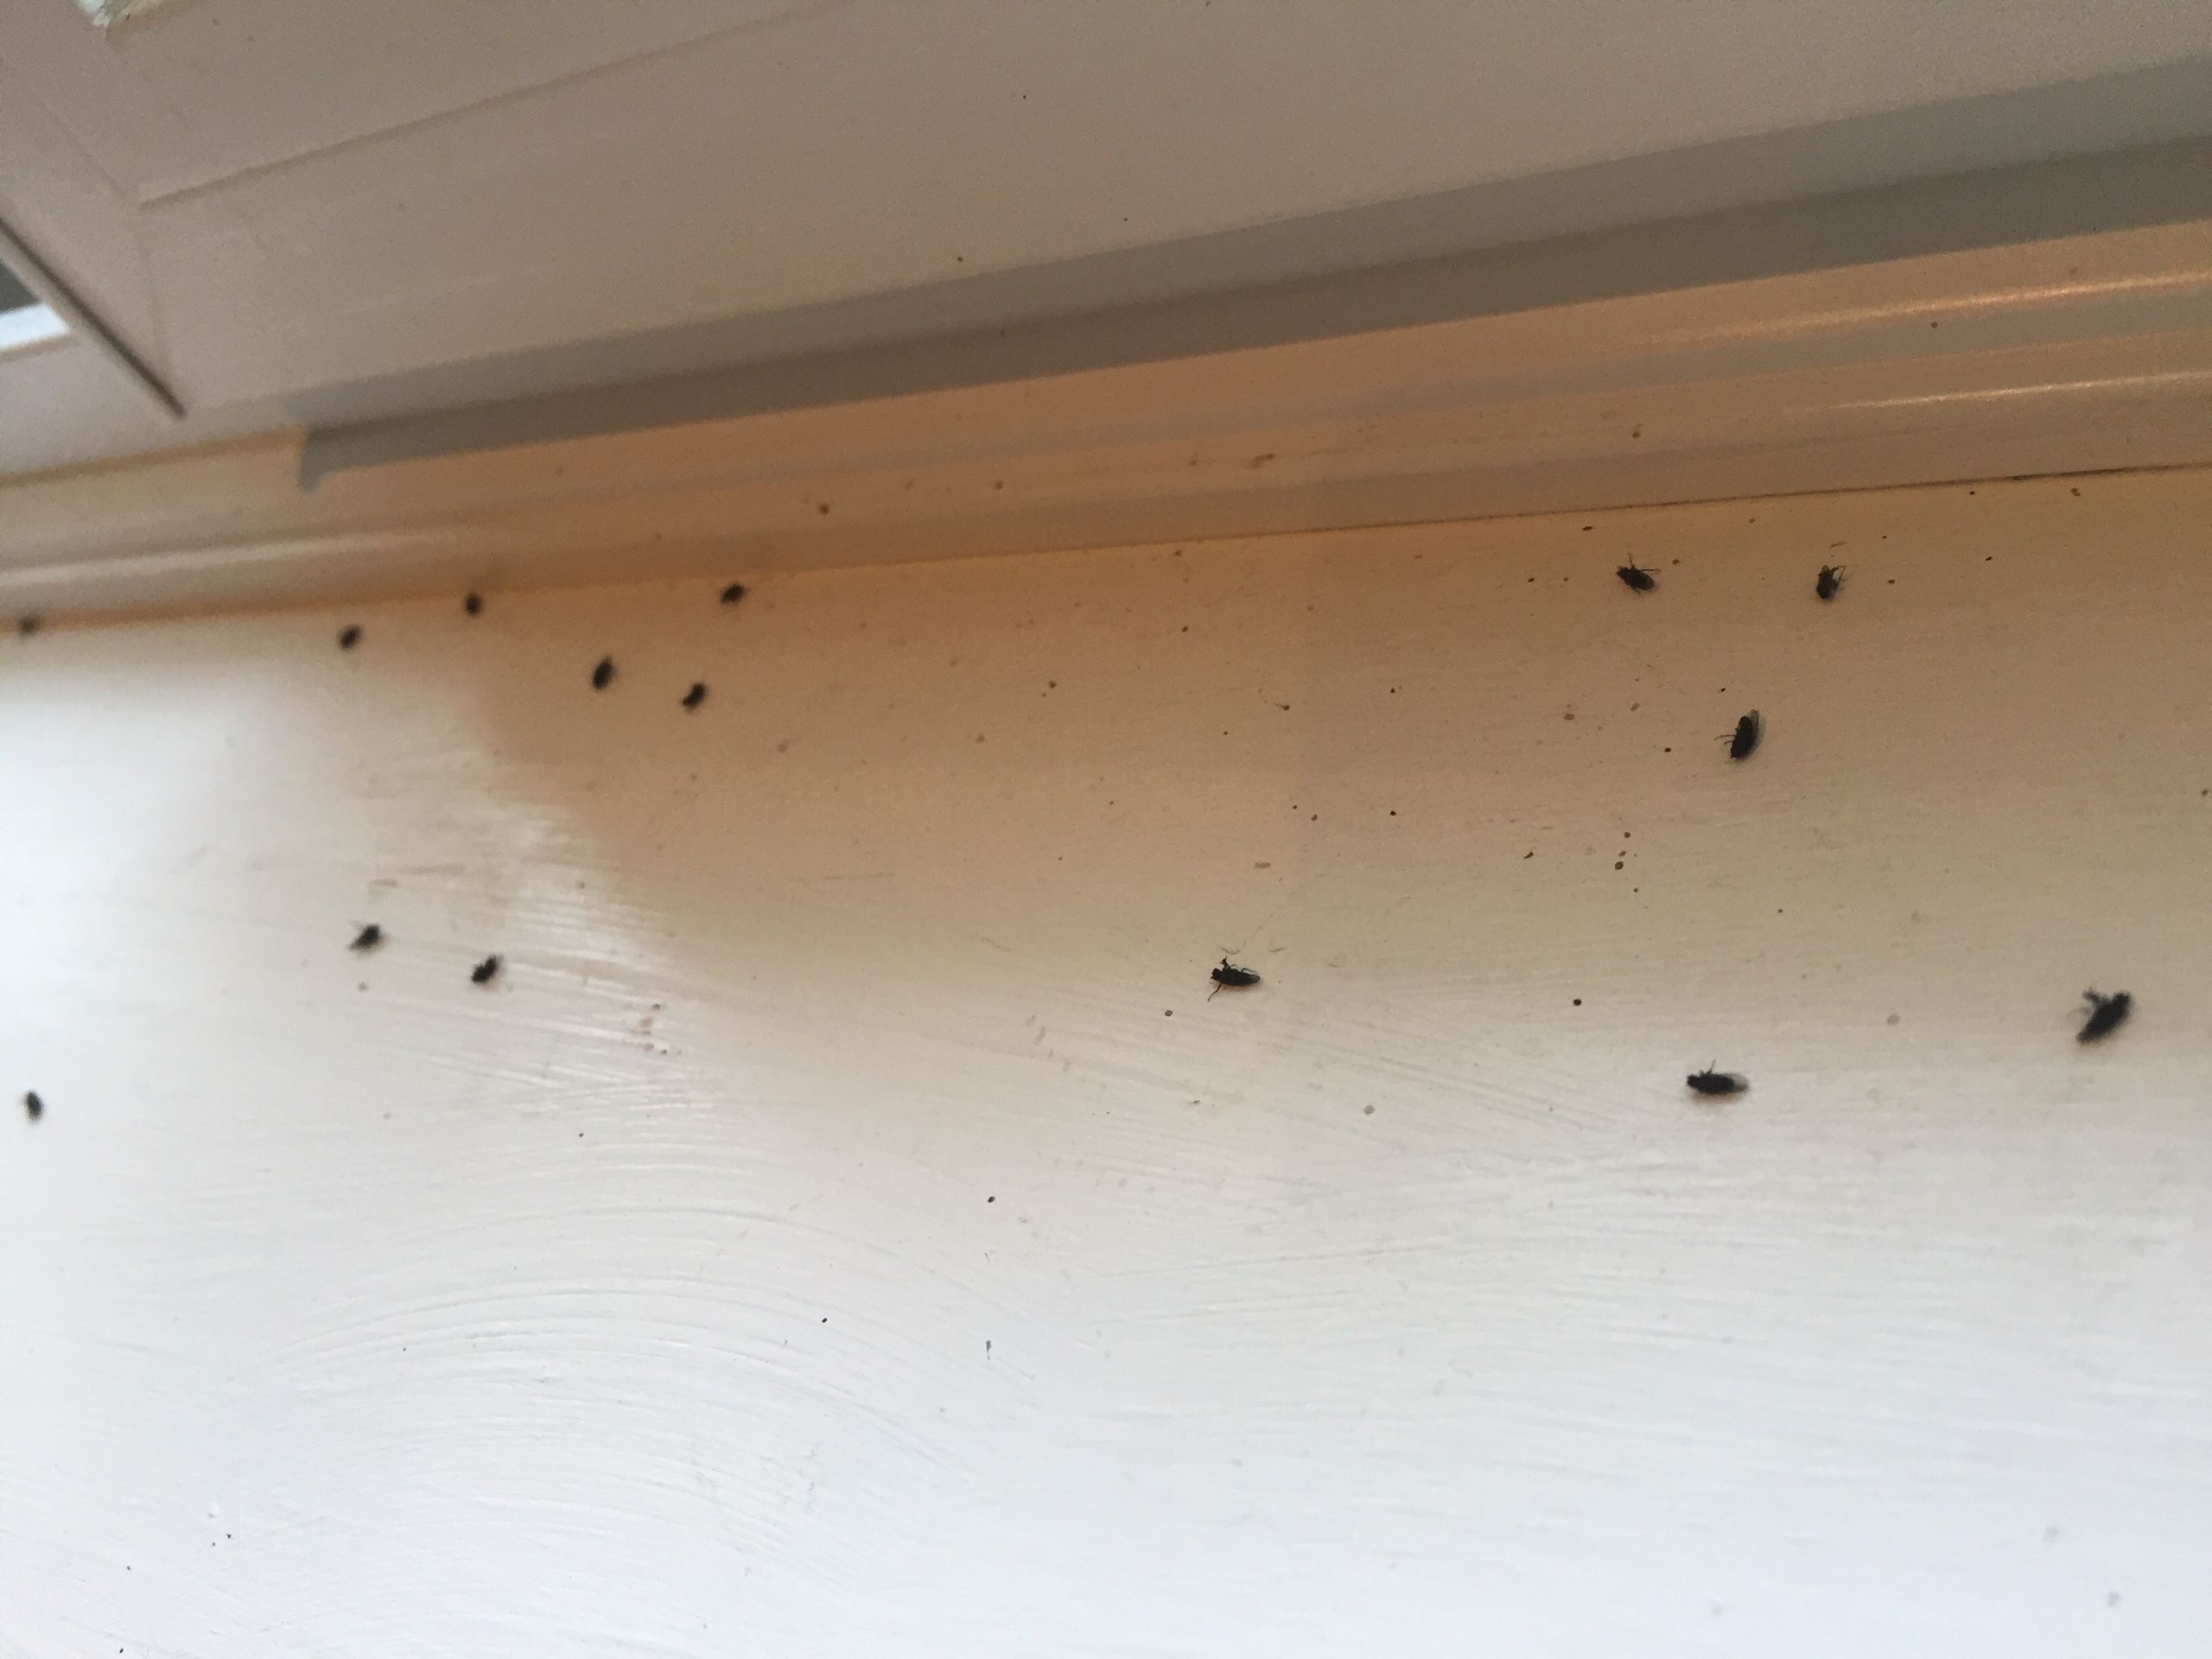 Small Black Flies In Bathroom
 My bathroom is infested with tiny black flies Ask an Expert